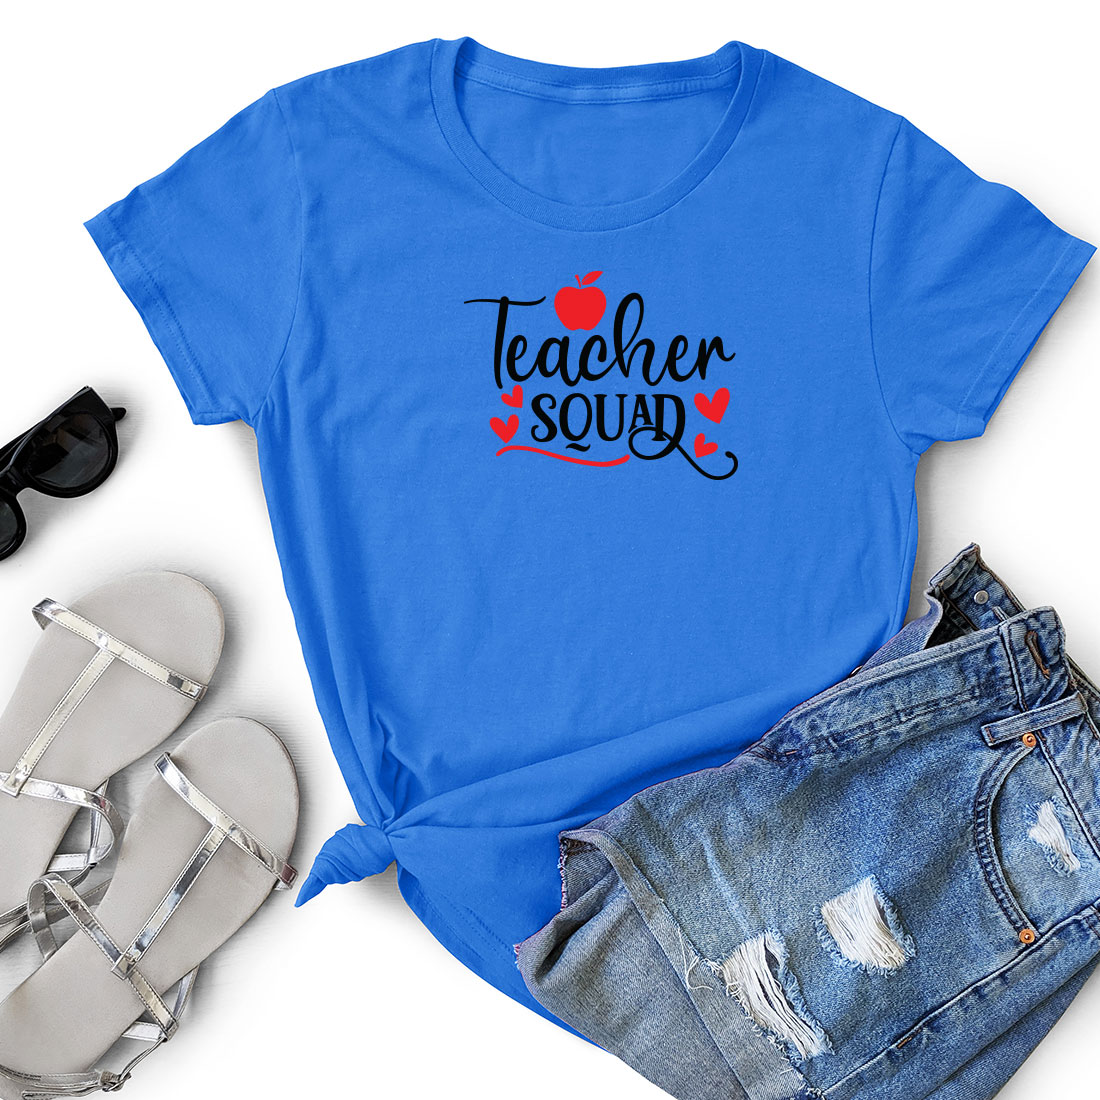 T - shirt that says teacher soup next to a pair of shorts.